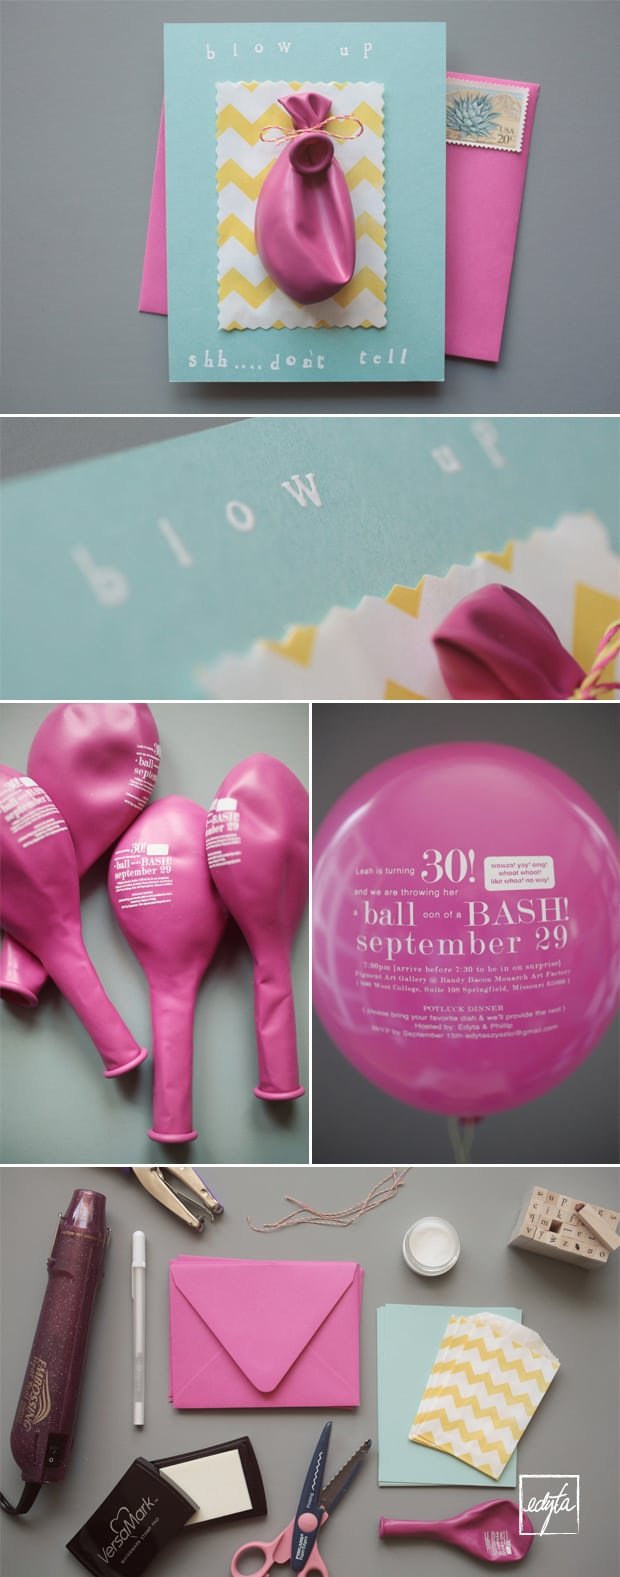 Sweet Invite! You Blow Up The Balloon  The Balloon Is The Invite